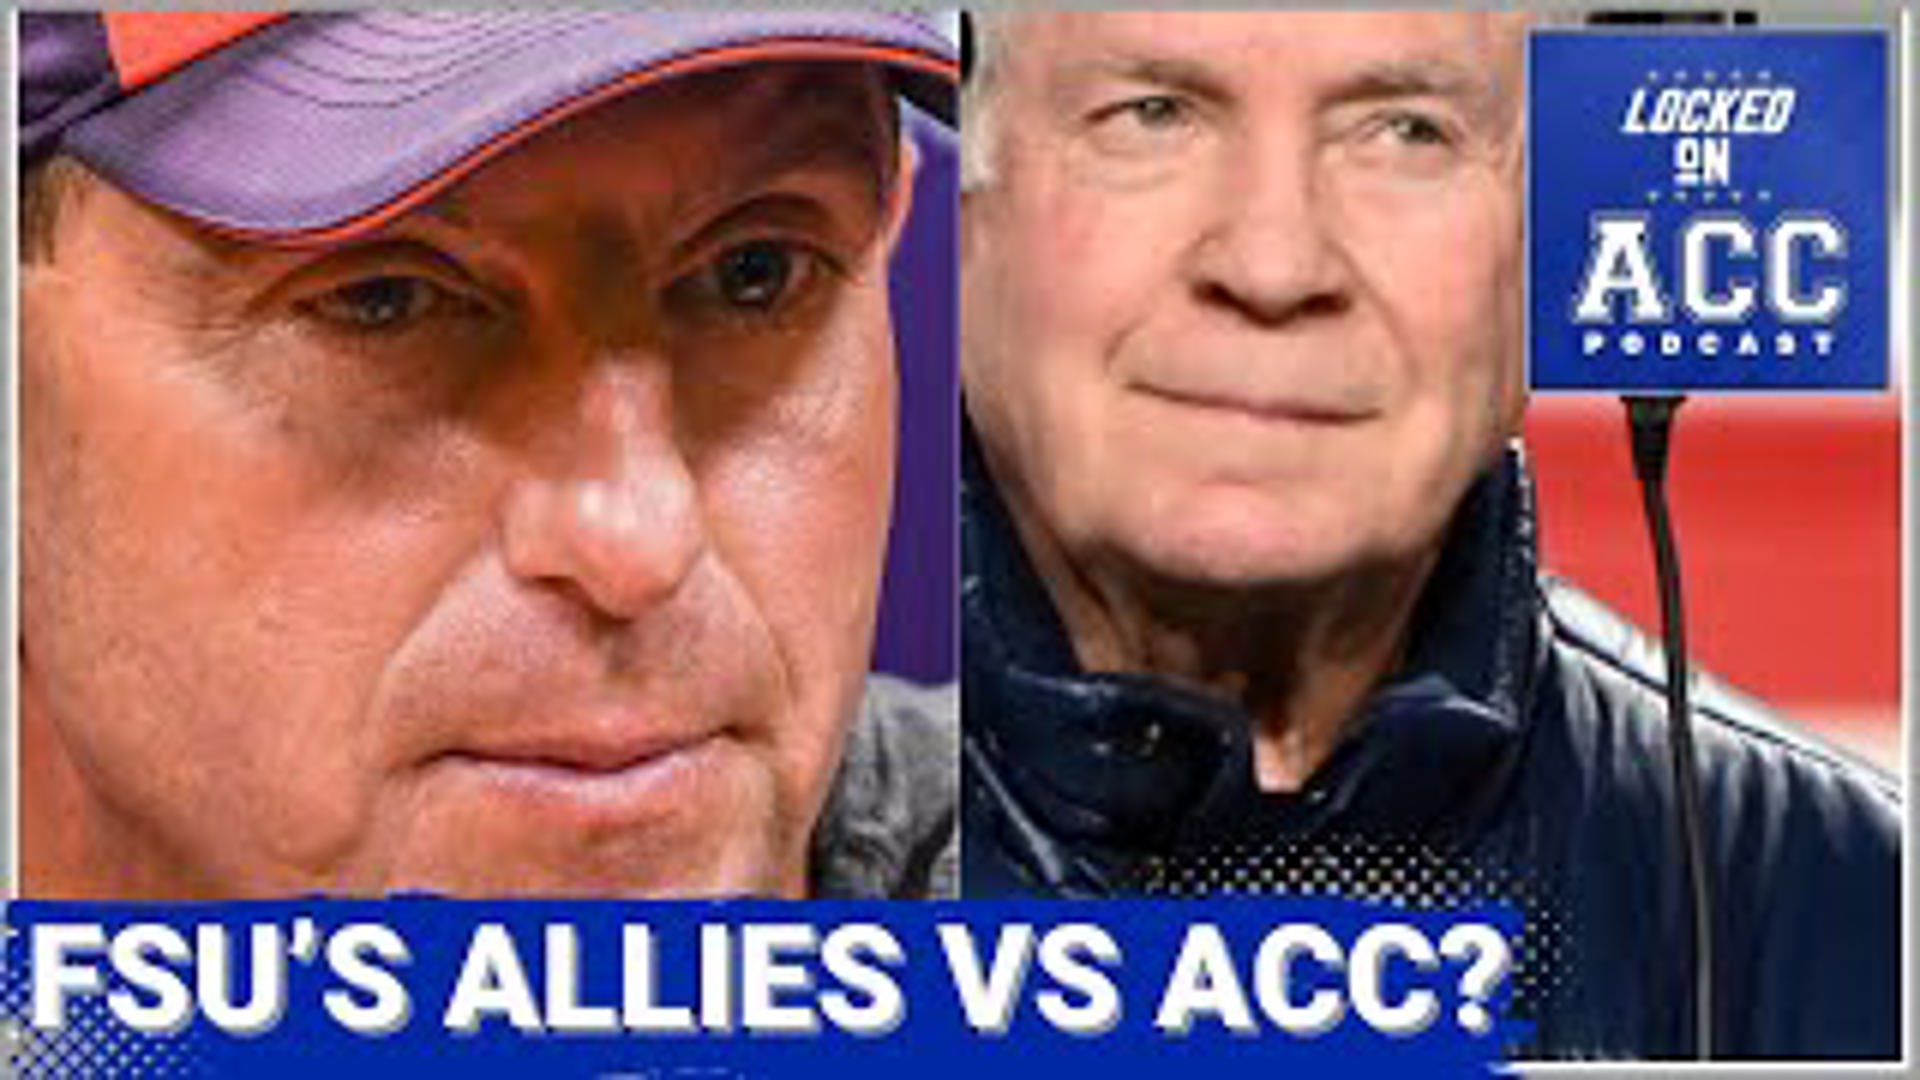 The Tampa Bay Times has revealed which ACC schools did not attend the meeting to vote on suing Florida State University.